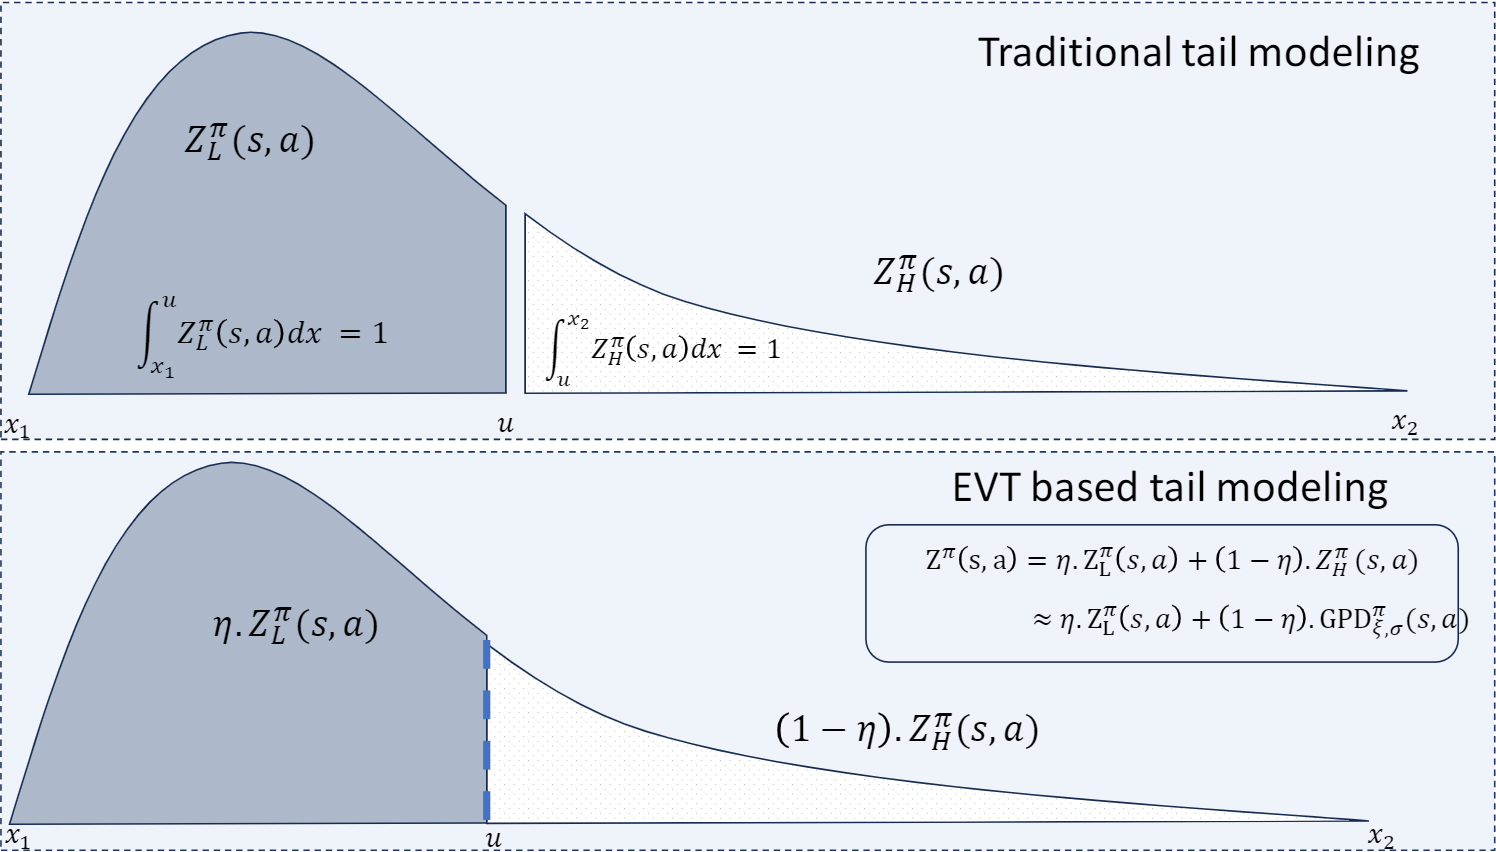 &lt;strong&gt;Figure 1 .&lt;/strong&gt; Modeling the tail and non-tail distributions of the state-action value function. The area under the non-tail distribution \(Z^{\pi}_L(s,a)\) and the tail distribution \(Z^{\pi}_H(s,a)\) is \(1\). Figure courtesy of [1].